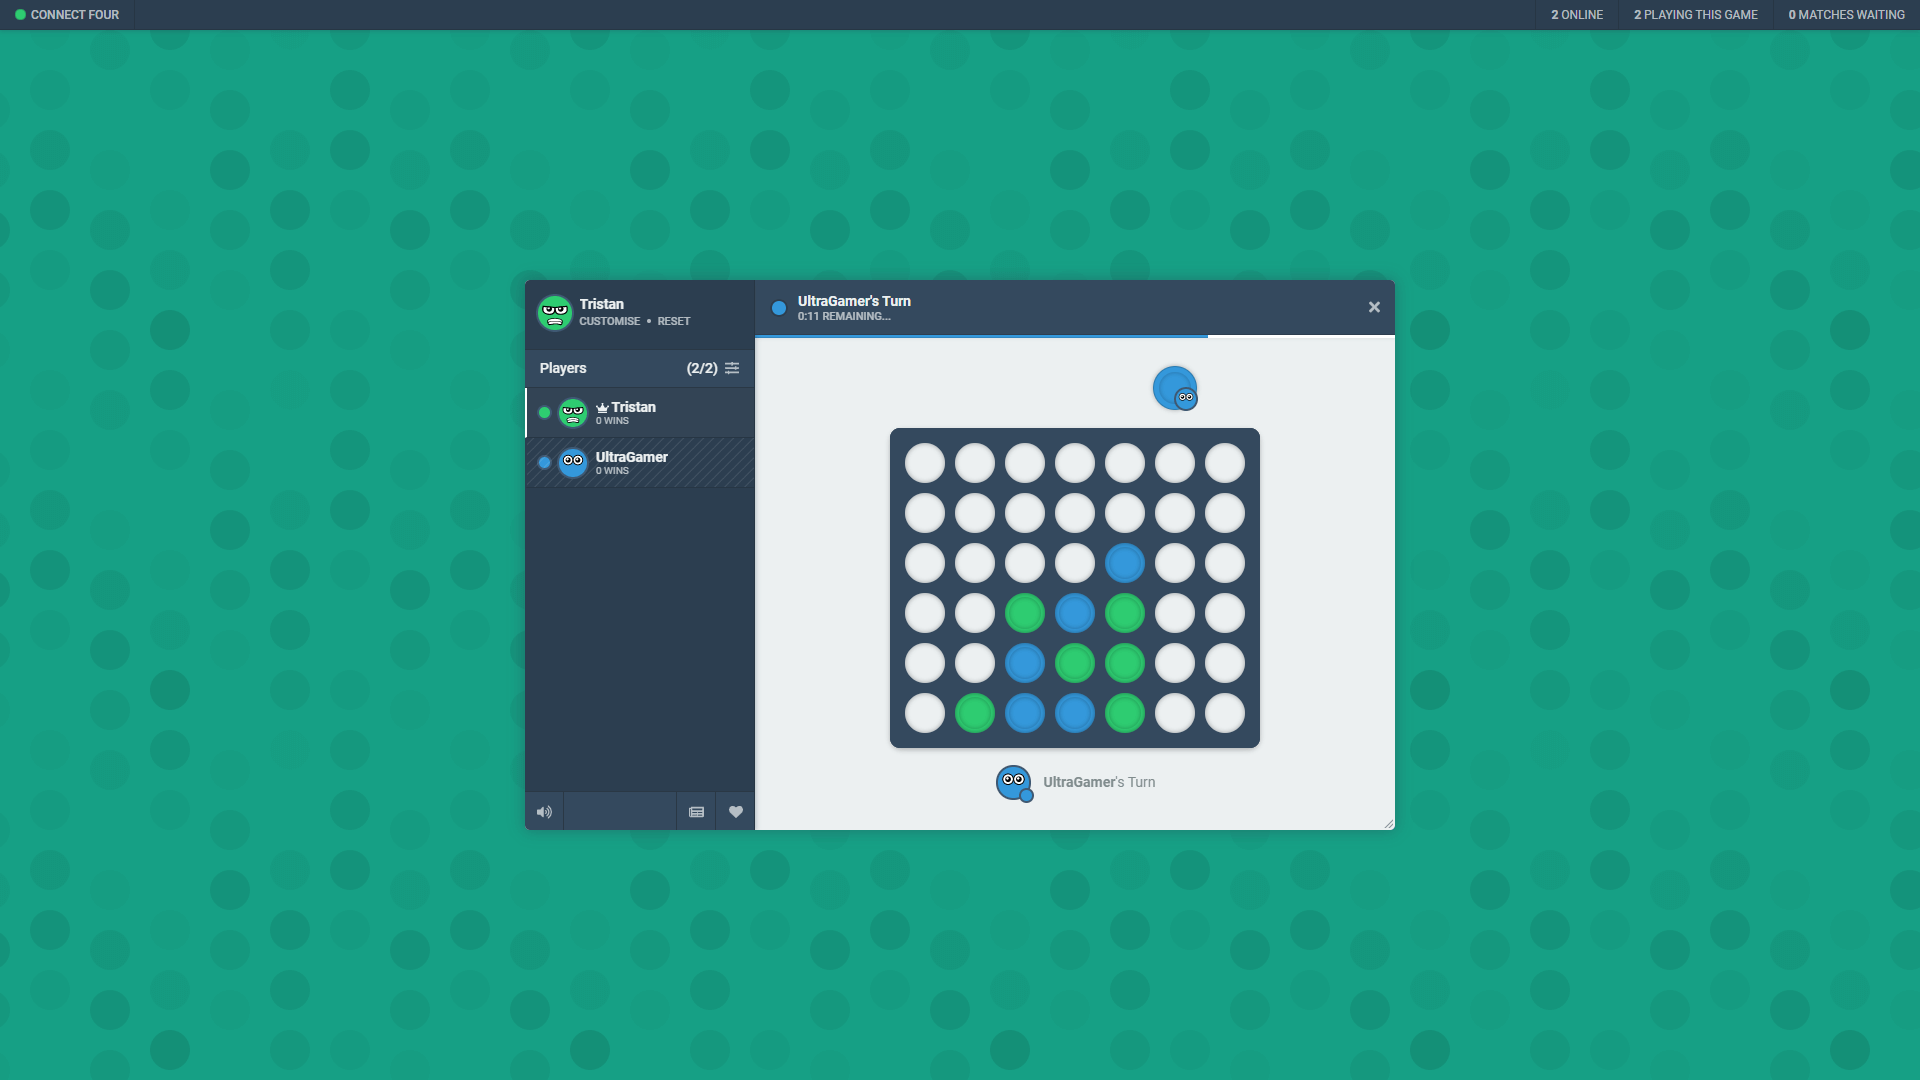 A screenshot of the Connect Four game on Bloob.io, showing what the gameplay experience is like.